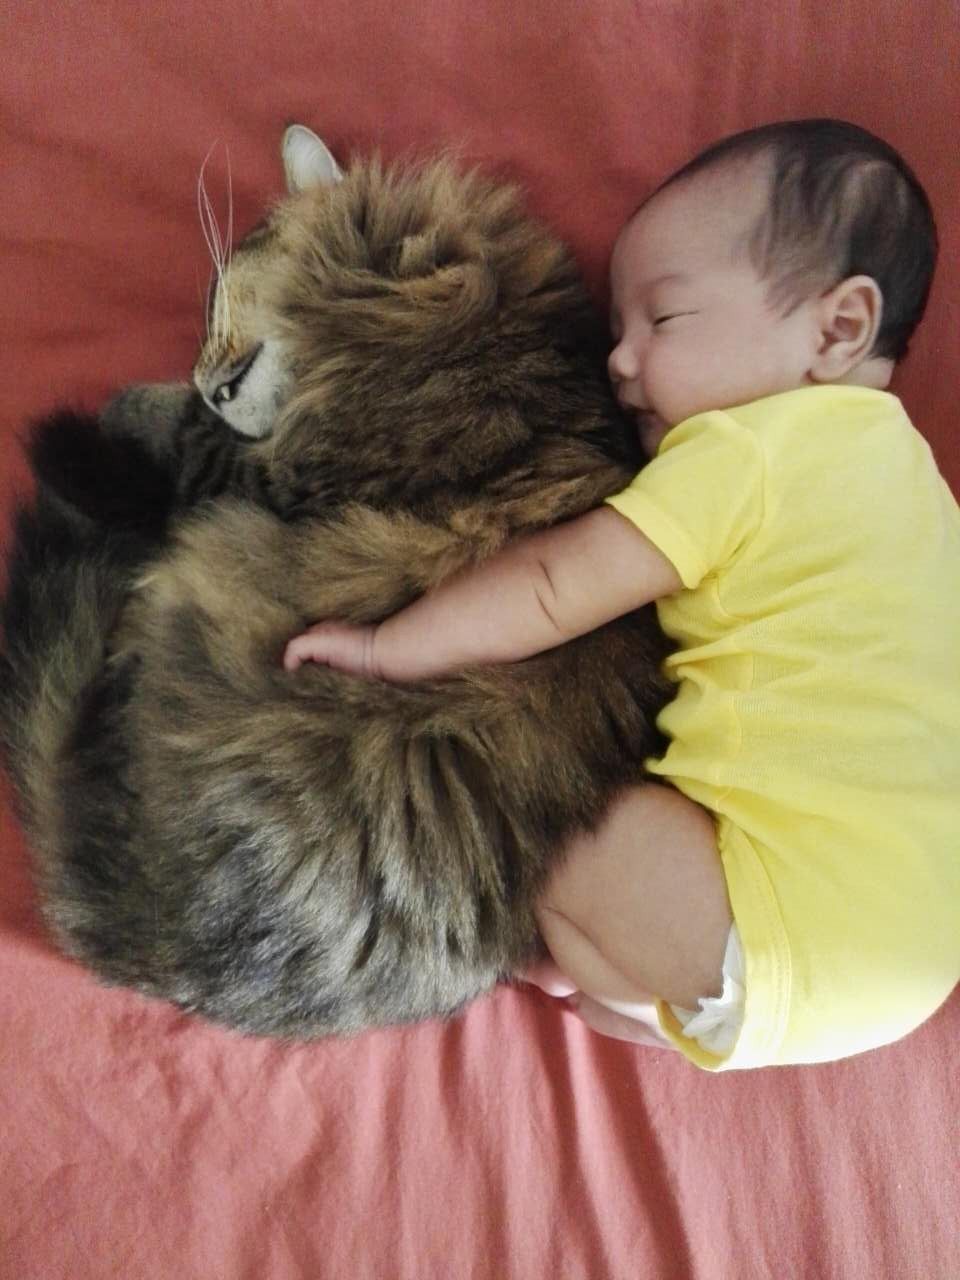 My wife sent me a message while i was at work saying the cat is watching the baby